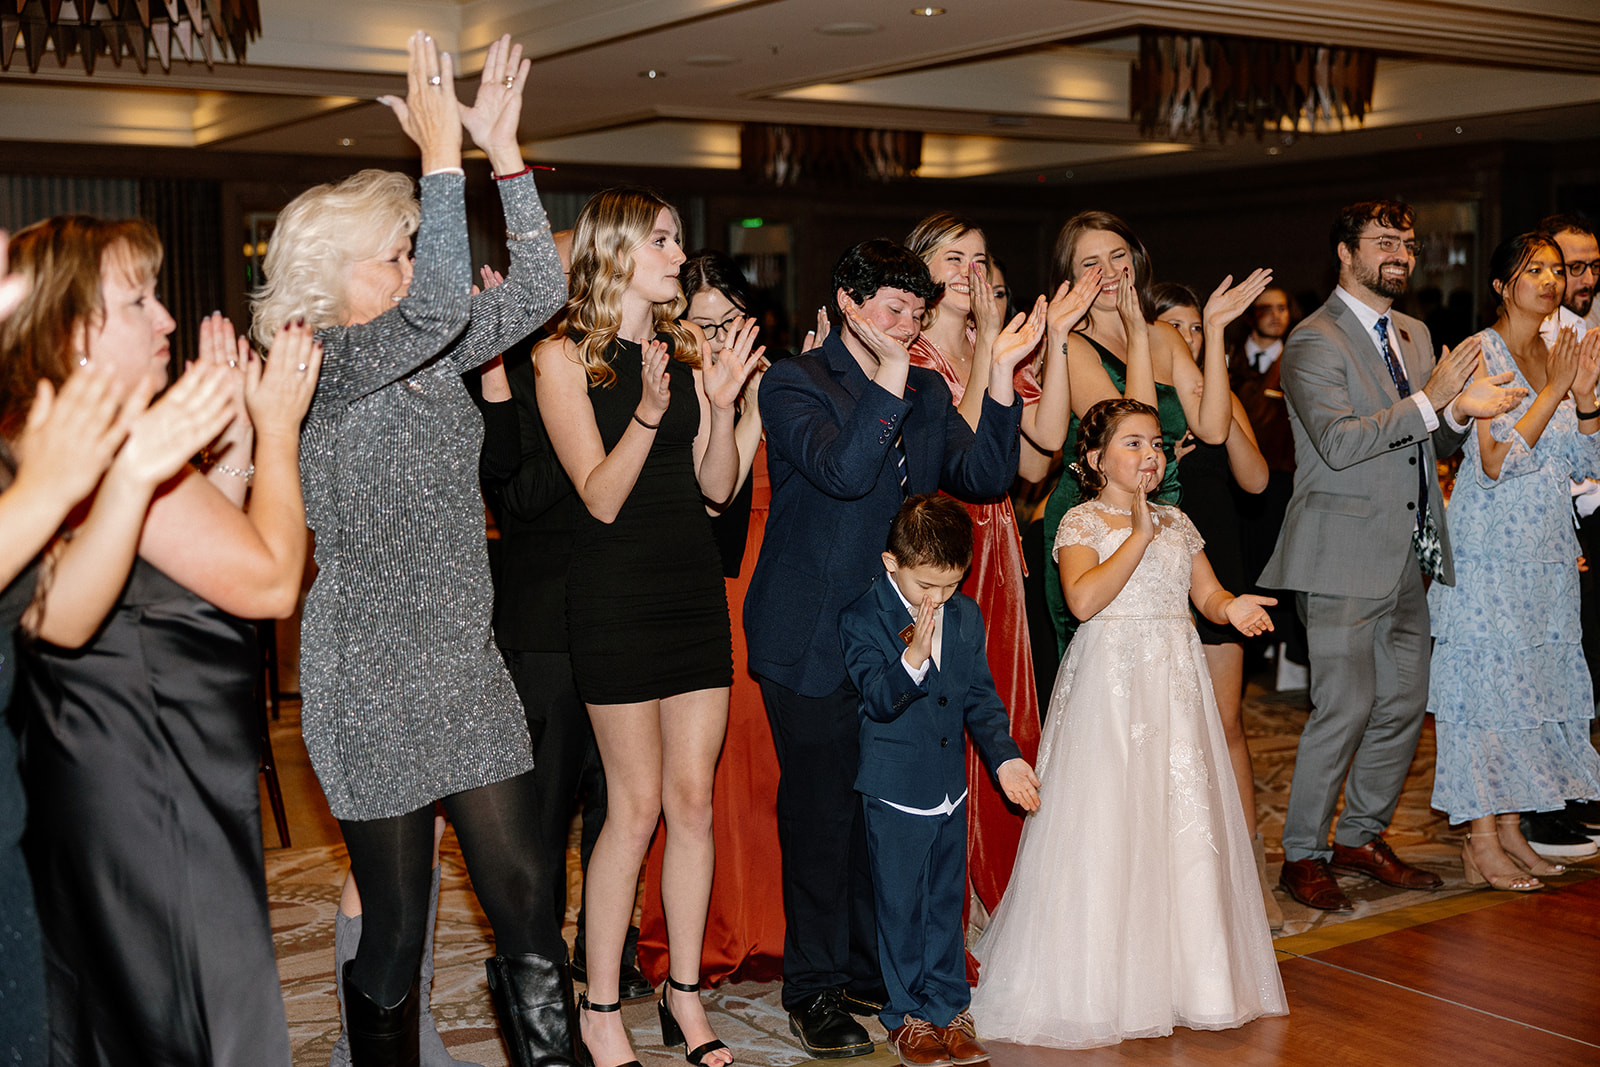 Guests look on and cheer the new bride and groom during their dreamy wedding reception